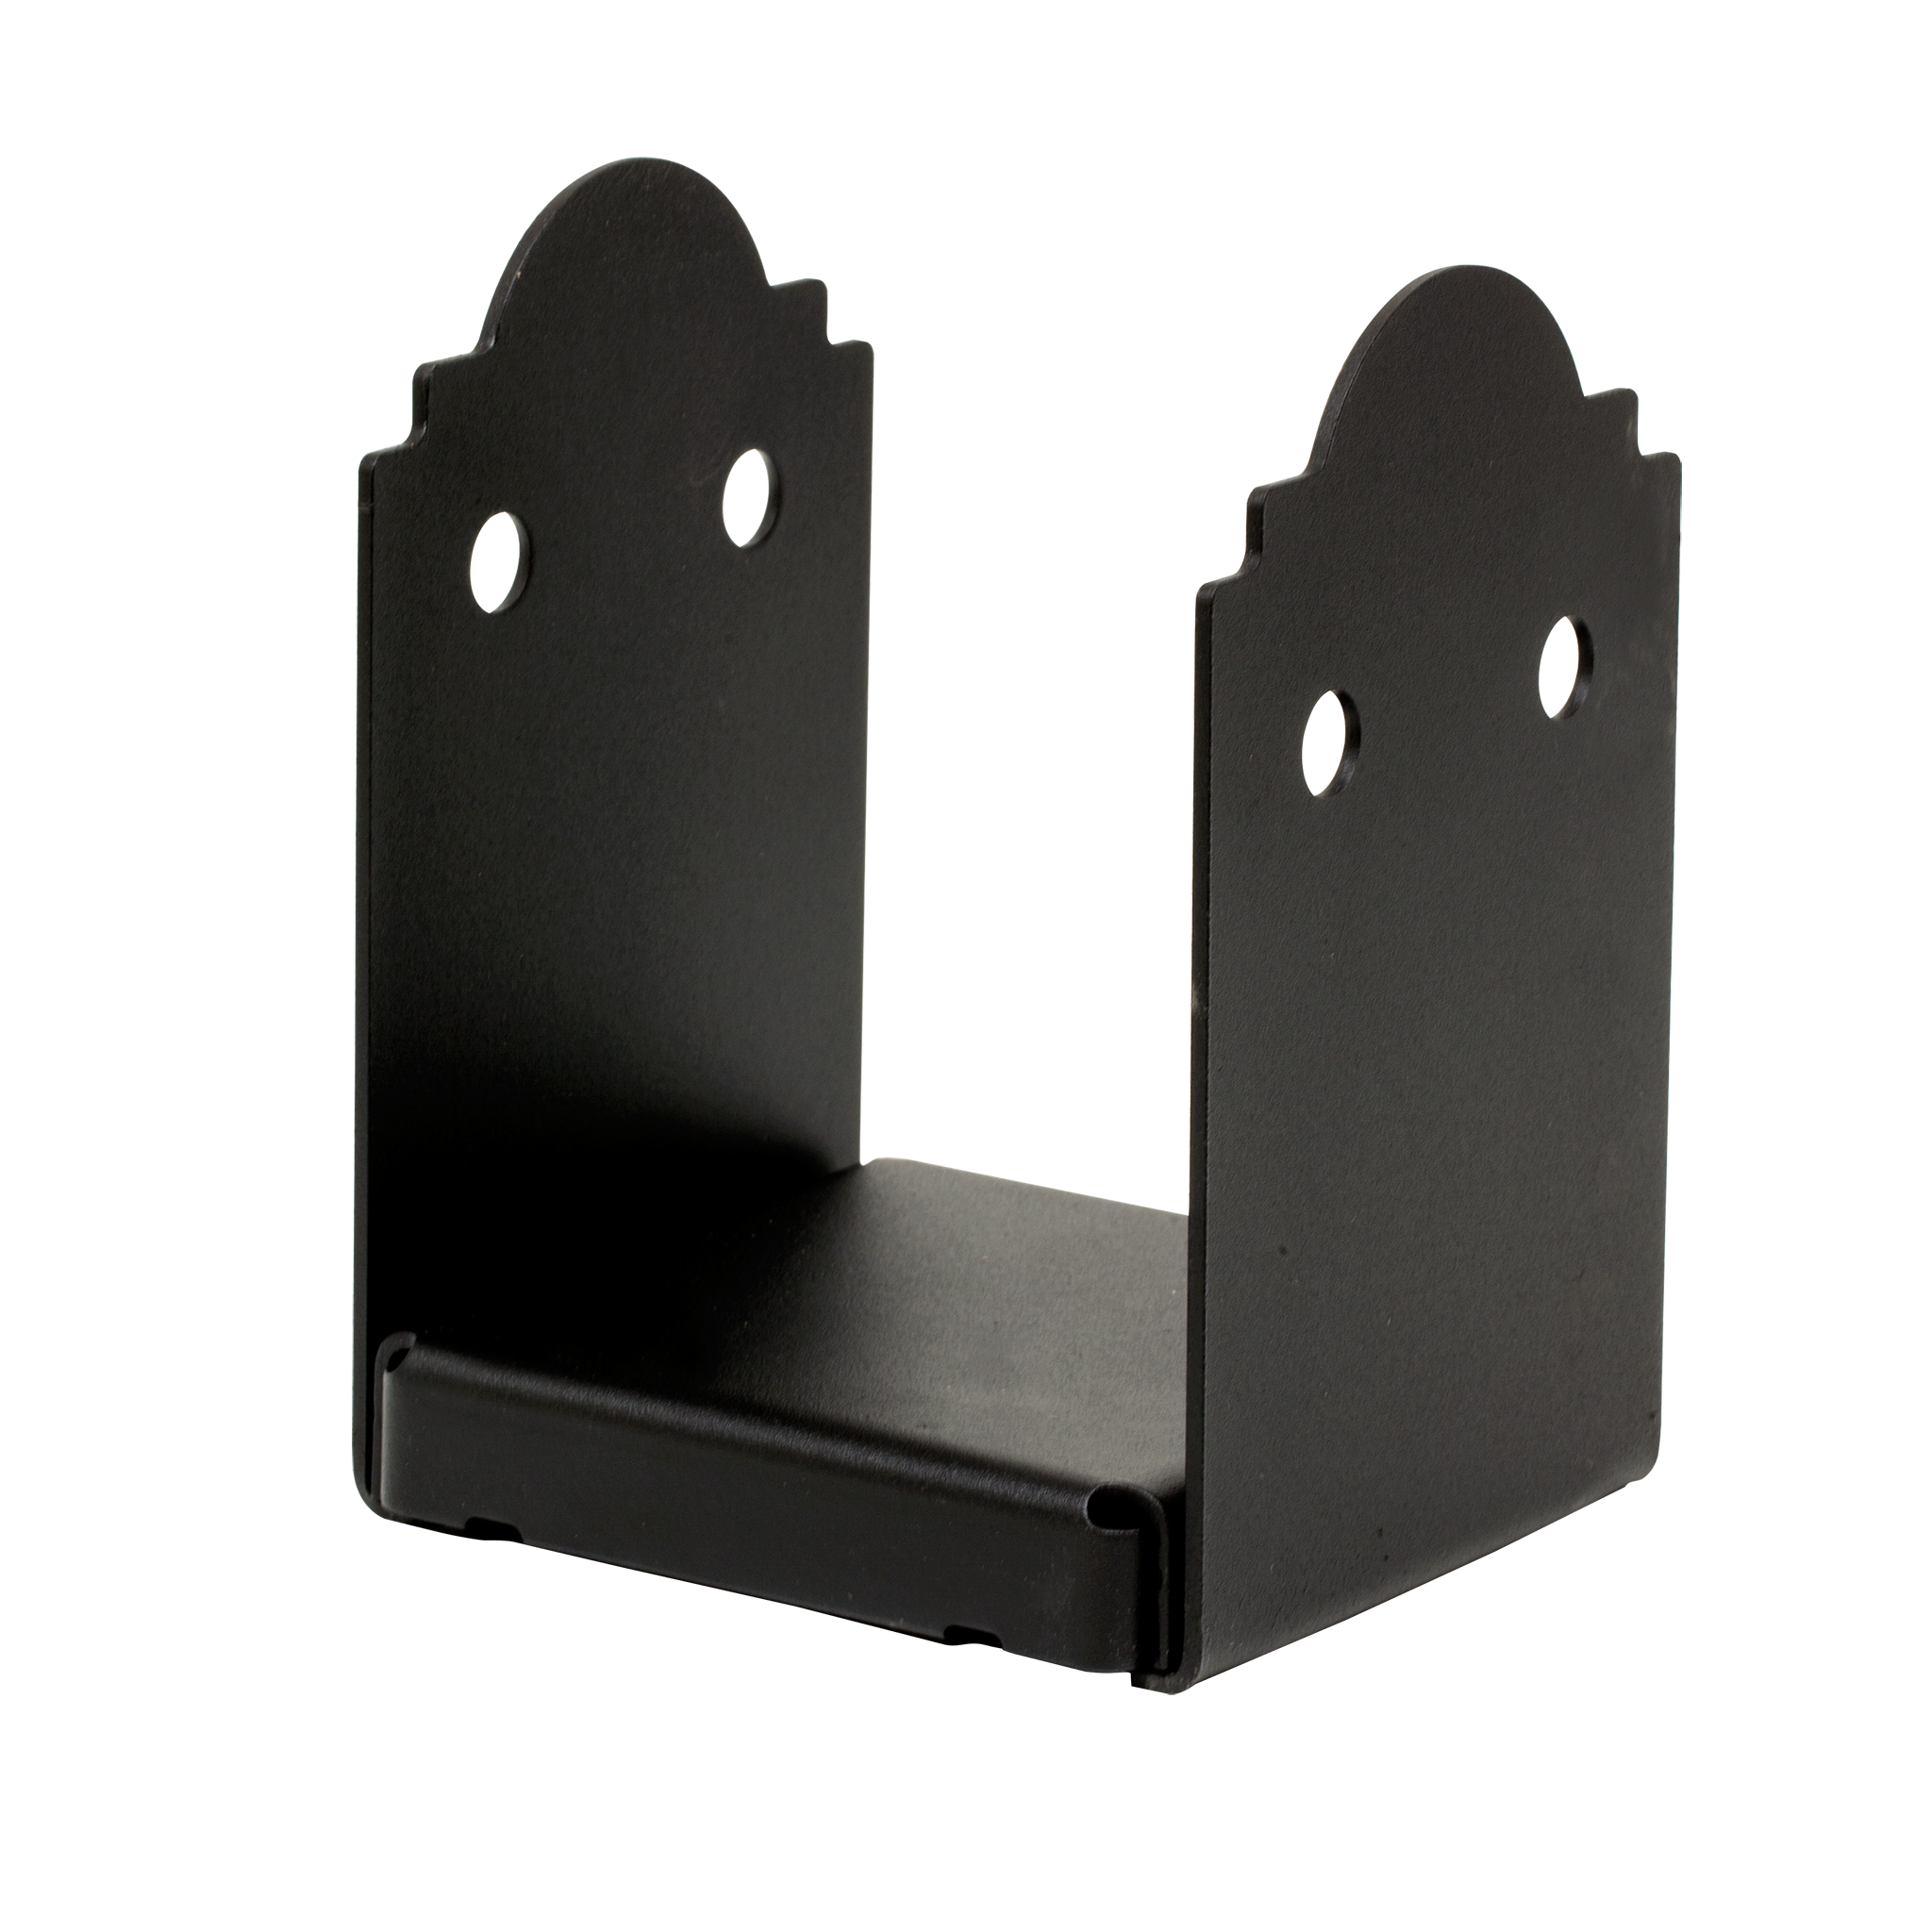 Outdoor Accents® Post Base for 6x6, ZMAX® Black Powder-Coated